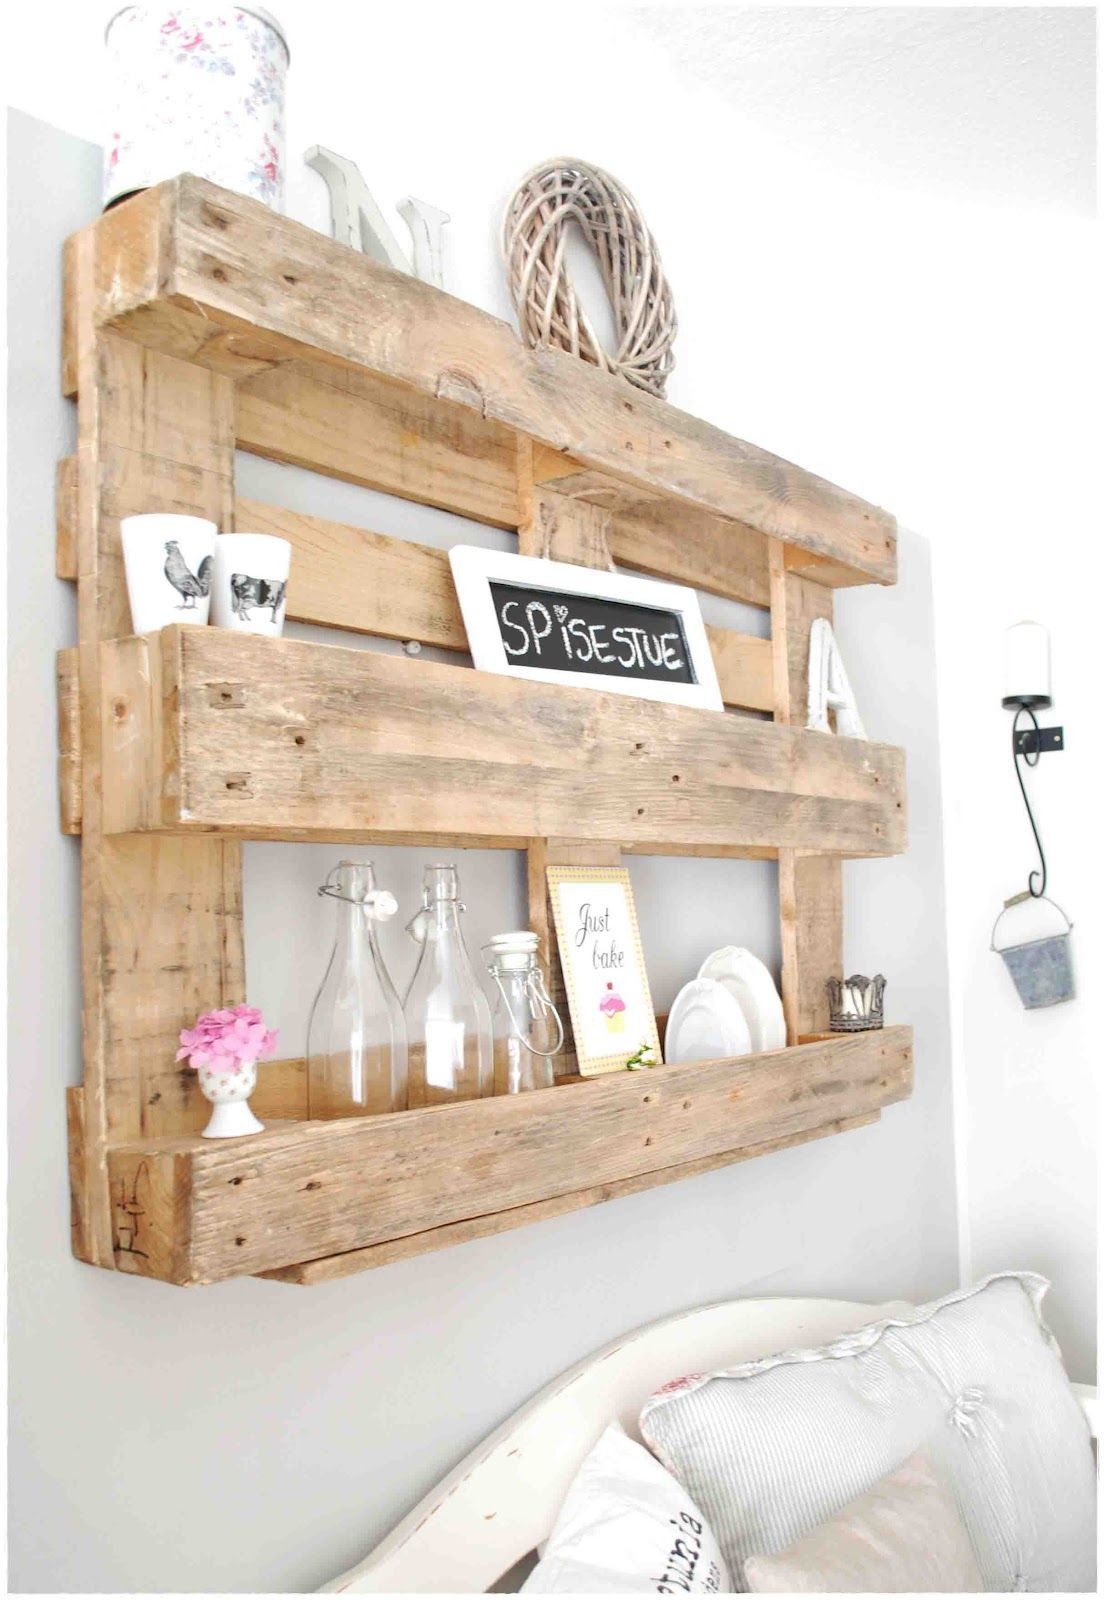 DIY Palette Organizer
 DIY Furniture Projects Made Whole Pallets